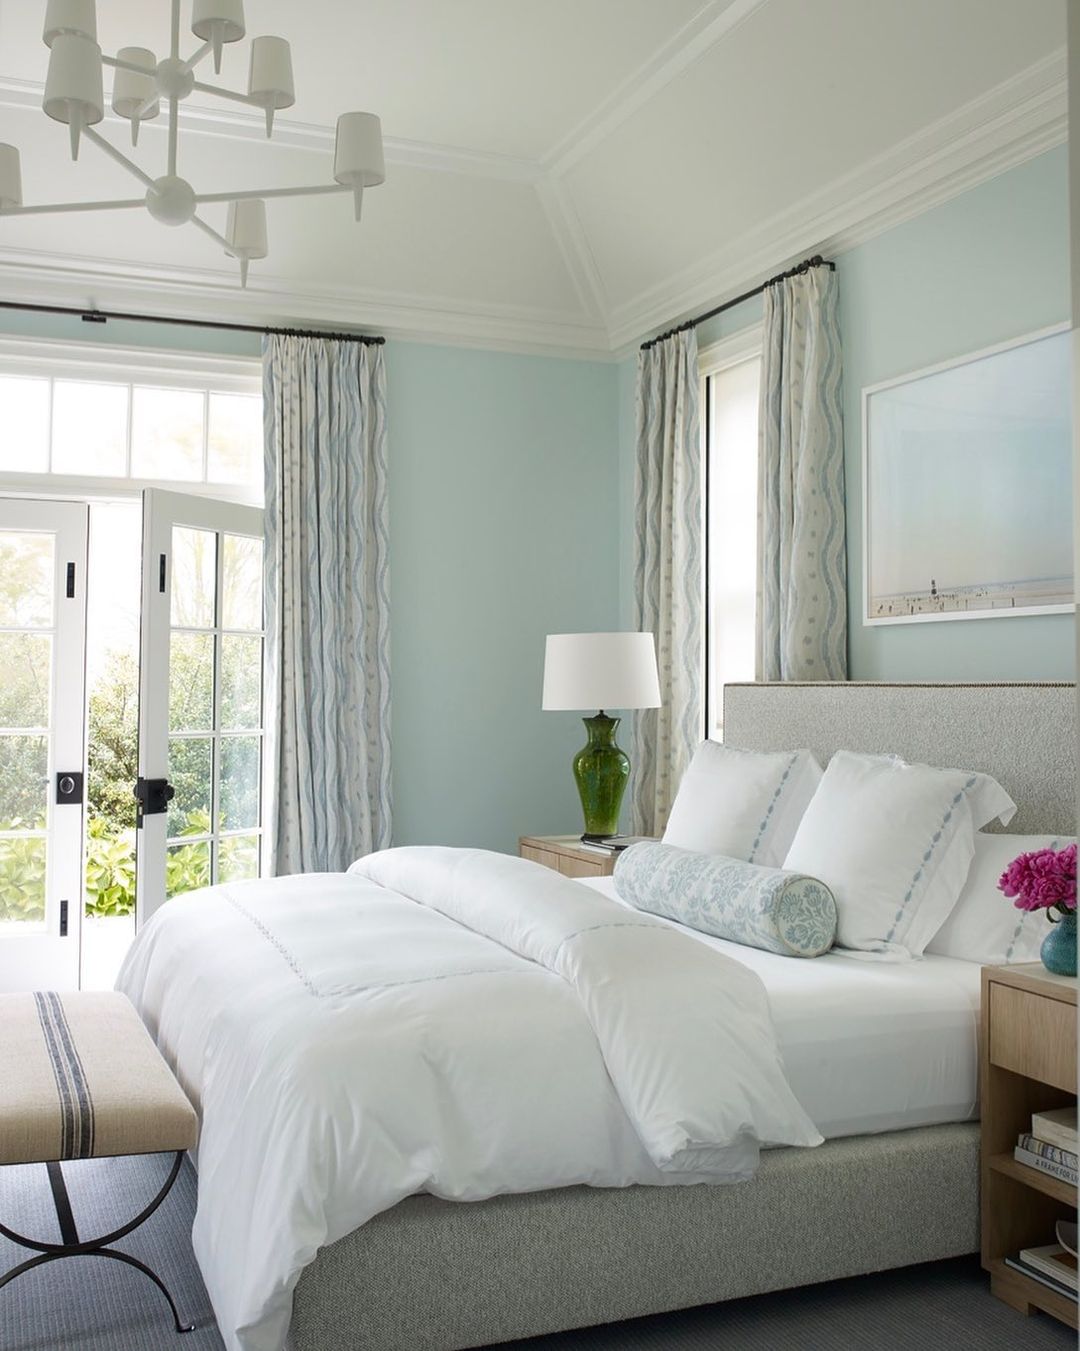 Inviting, white bed in a seafoam-colored bedroom in the Hamptons.